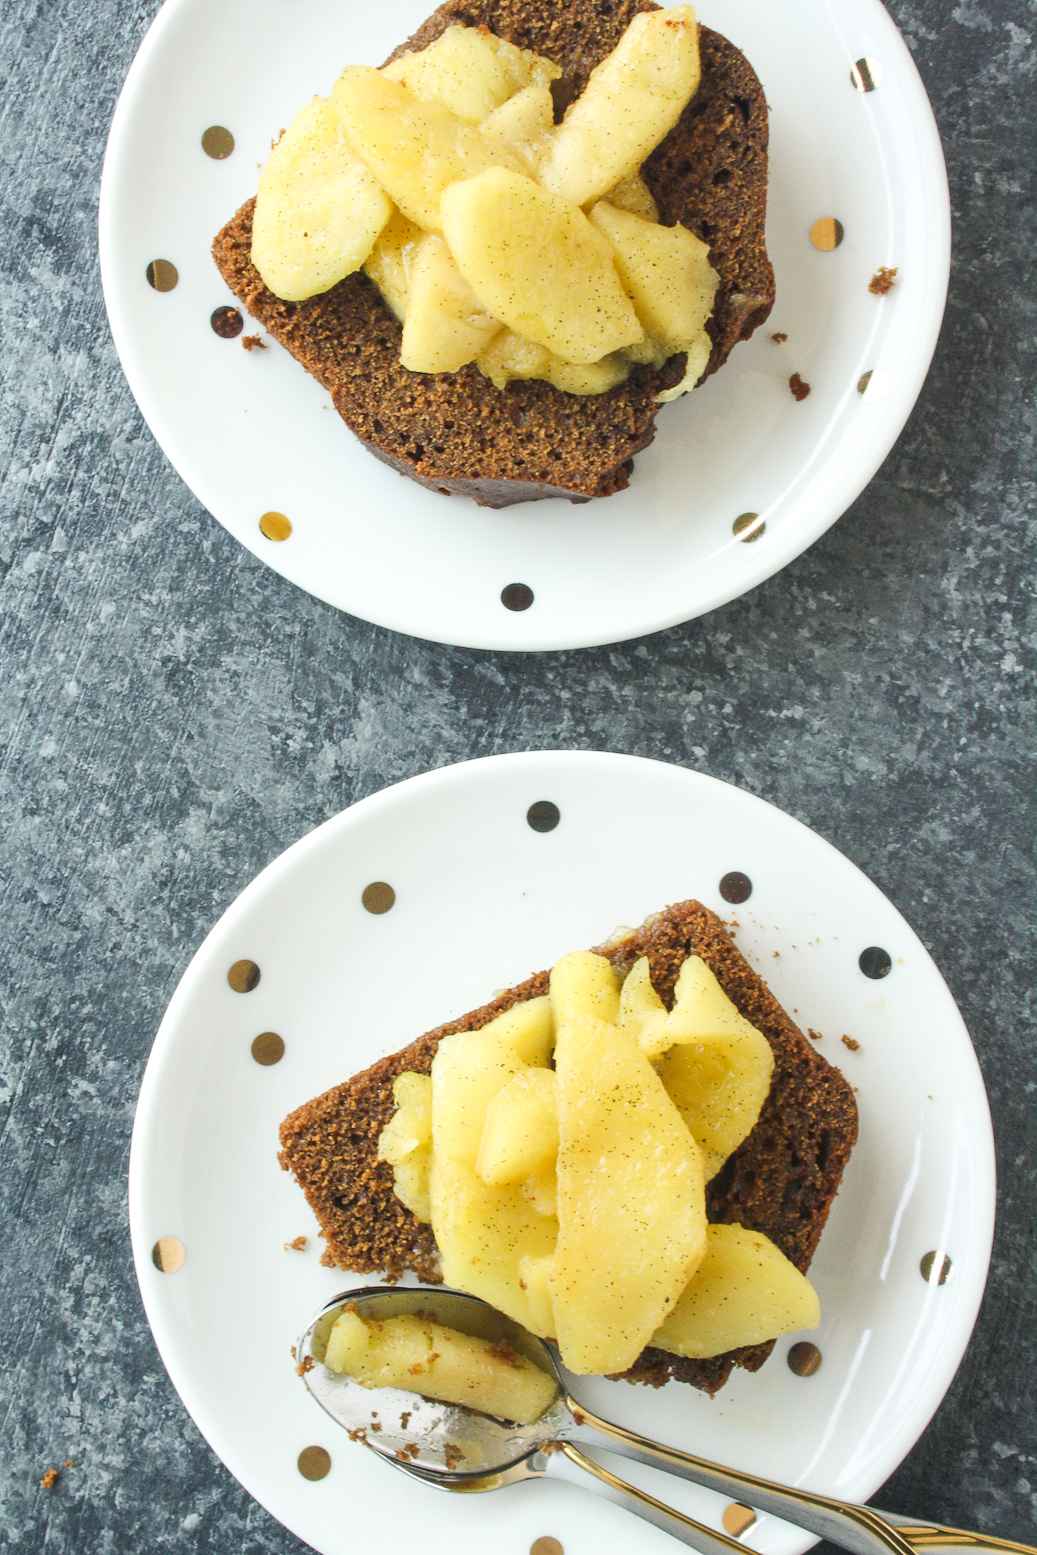 Moist, warmly spiced gingerbread cake with buttery apples cooked in whiskey!